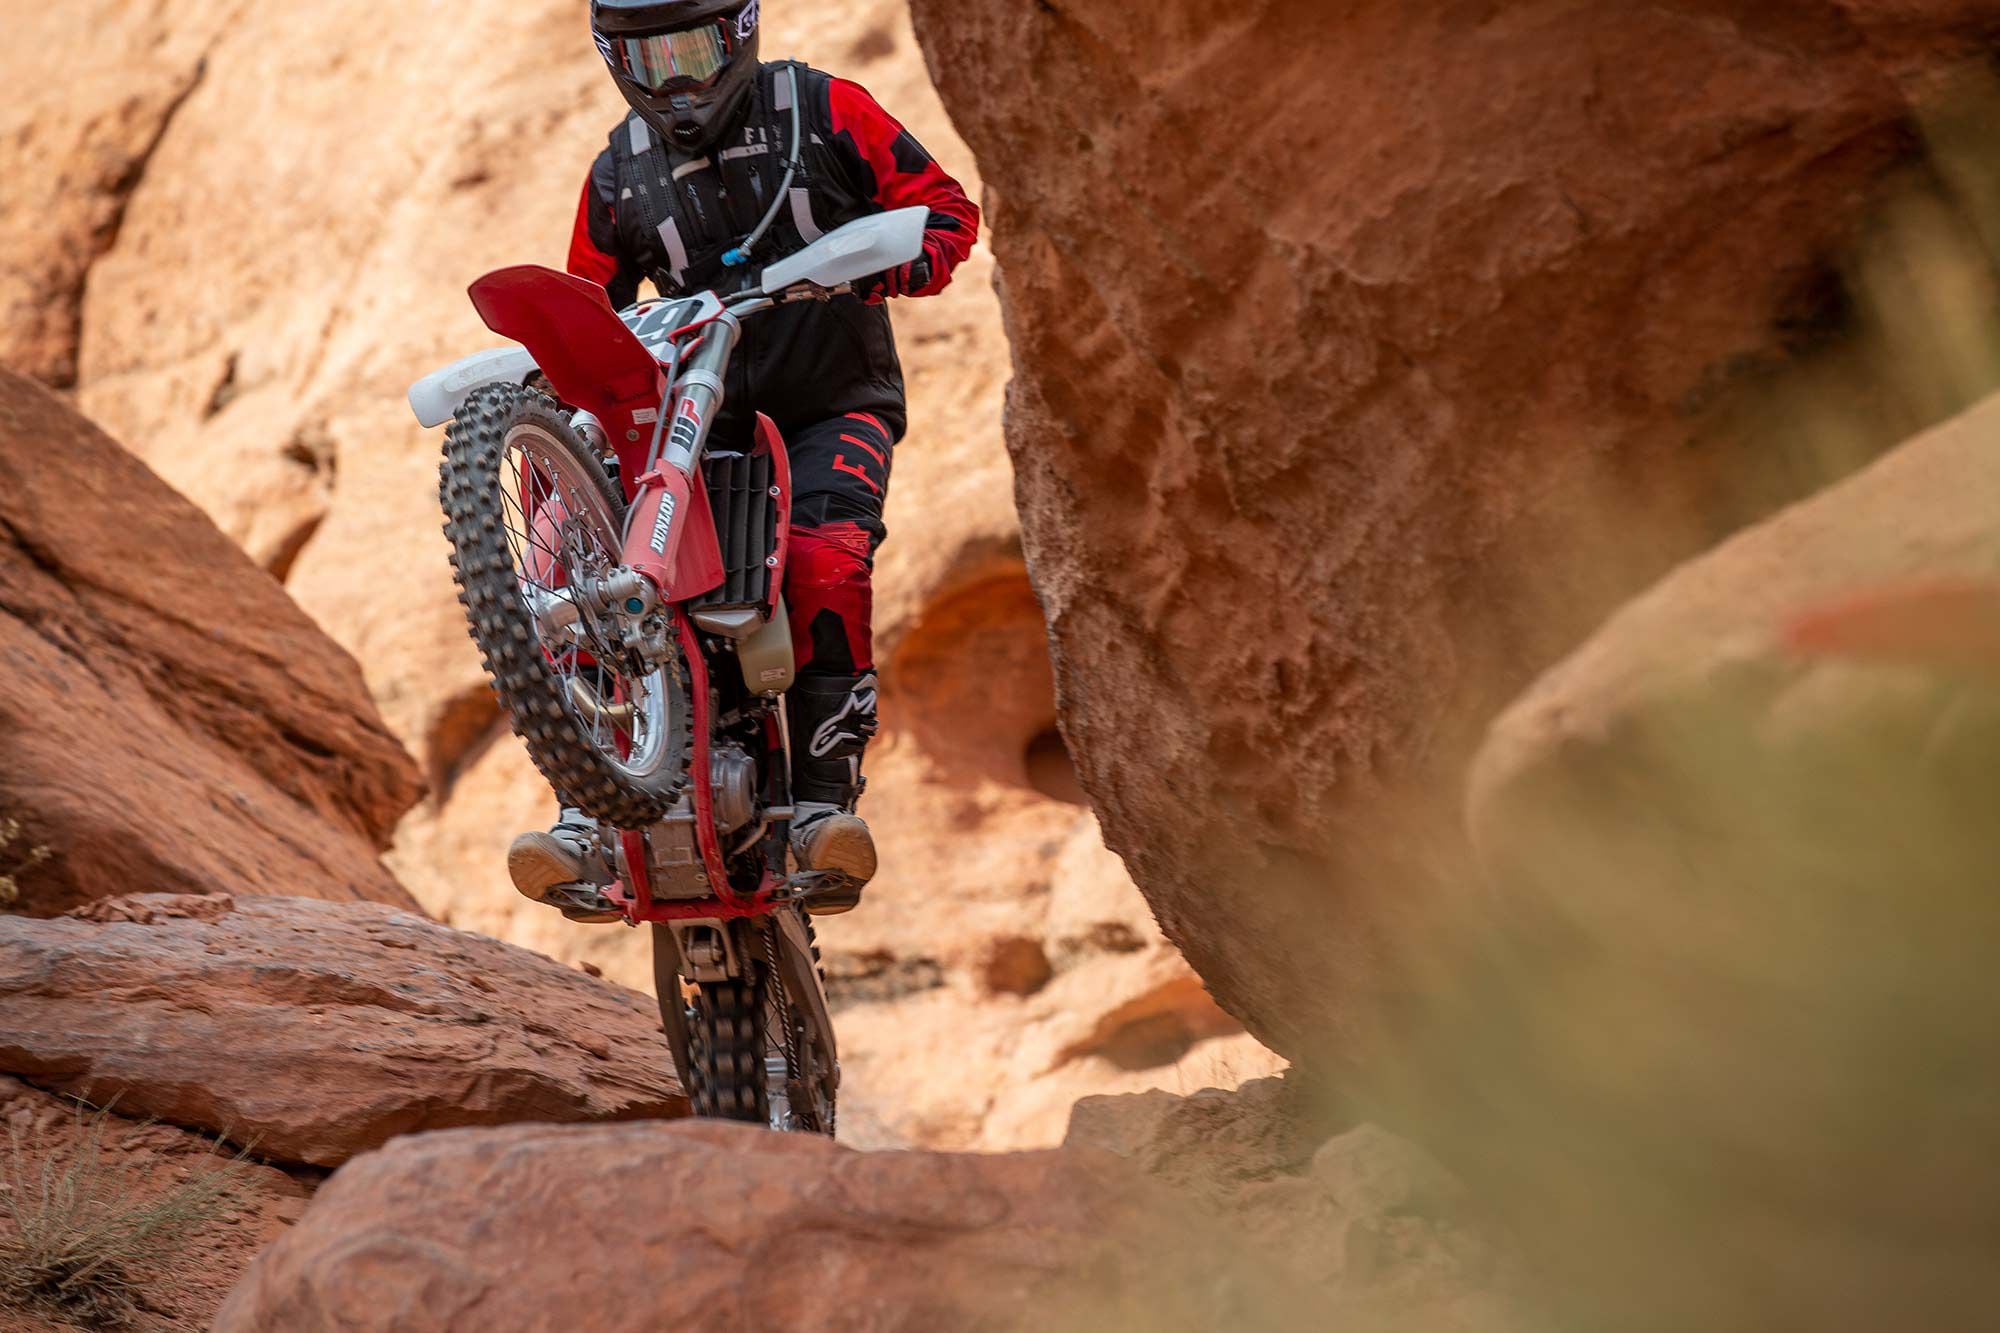 The EX 350F is the lightest of the three bikes and feels like it on the trail.